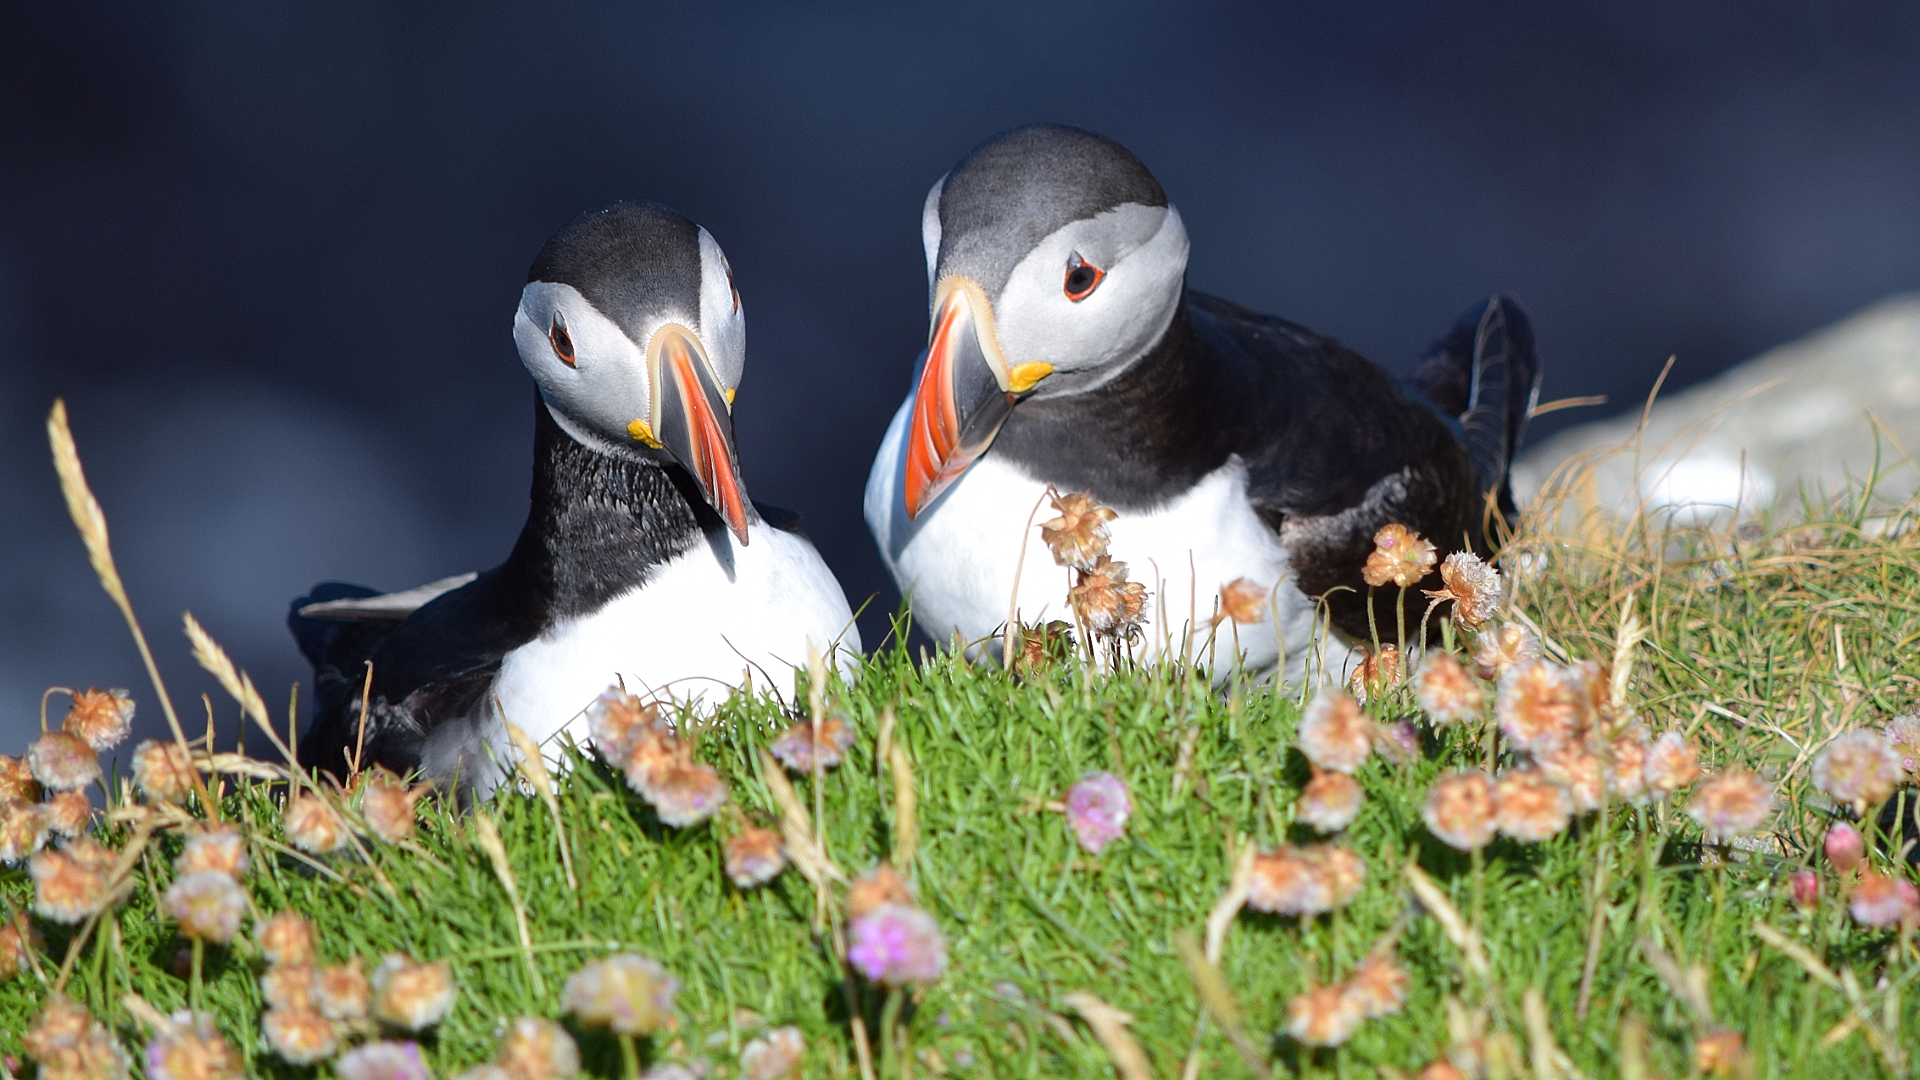 Two Puffins sitting in grass.